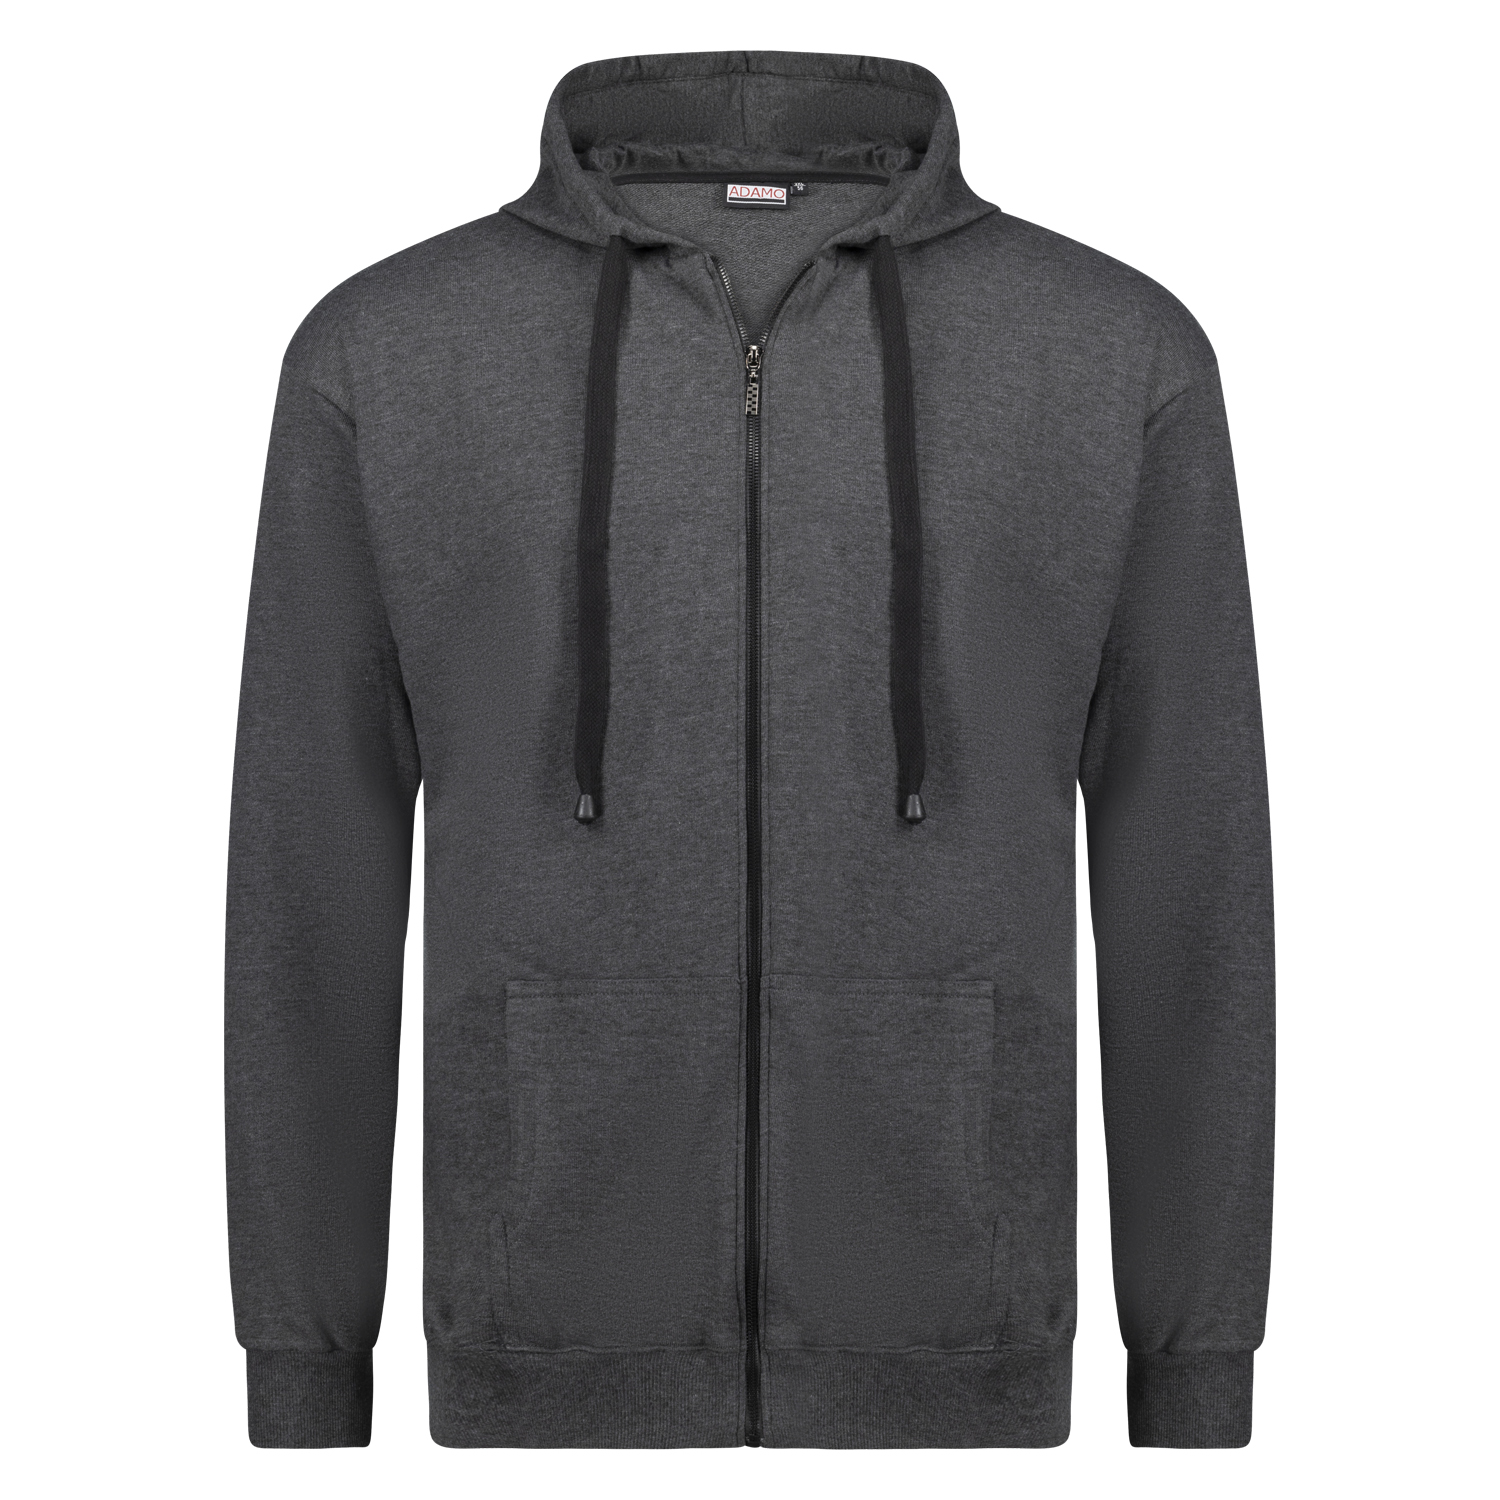 Adamo hooded jacket ATHEN in large sizes up to 14XL